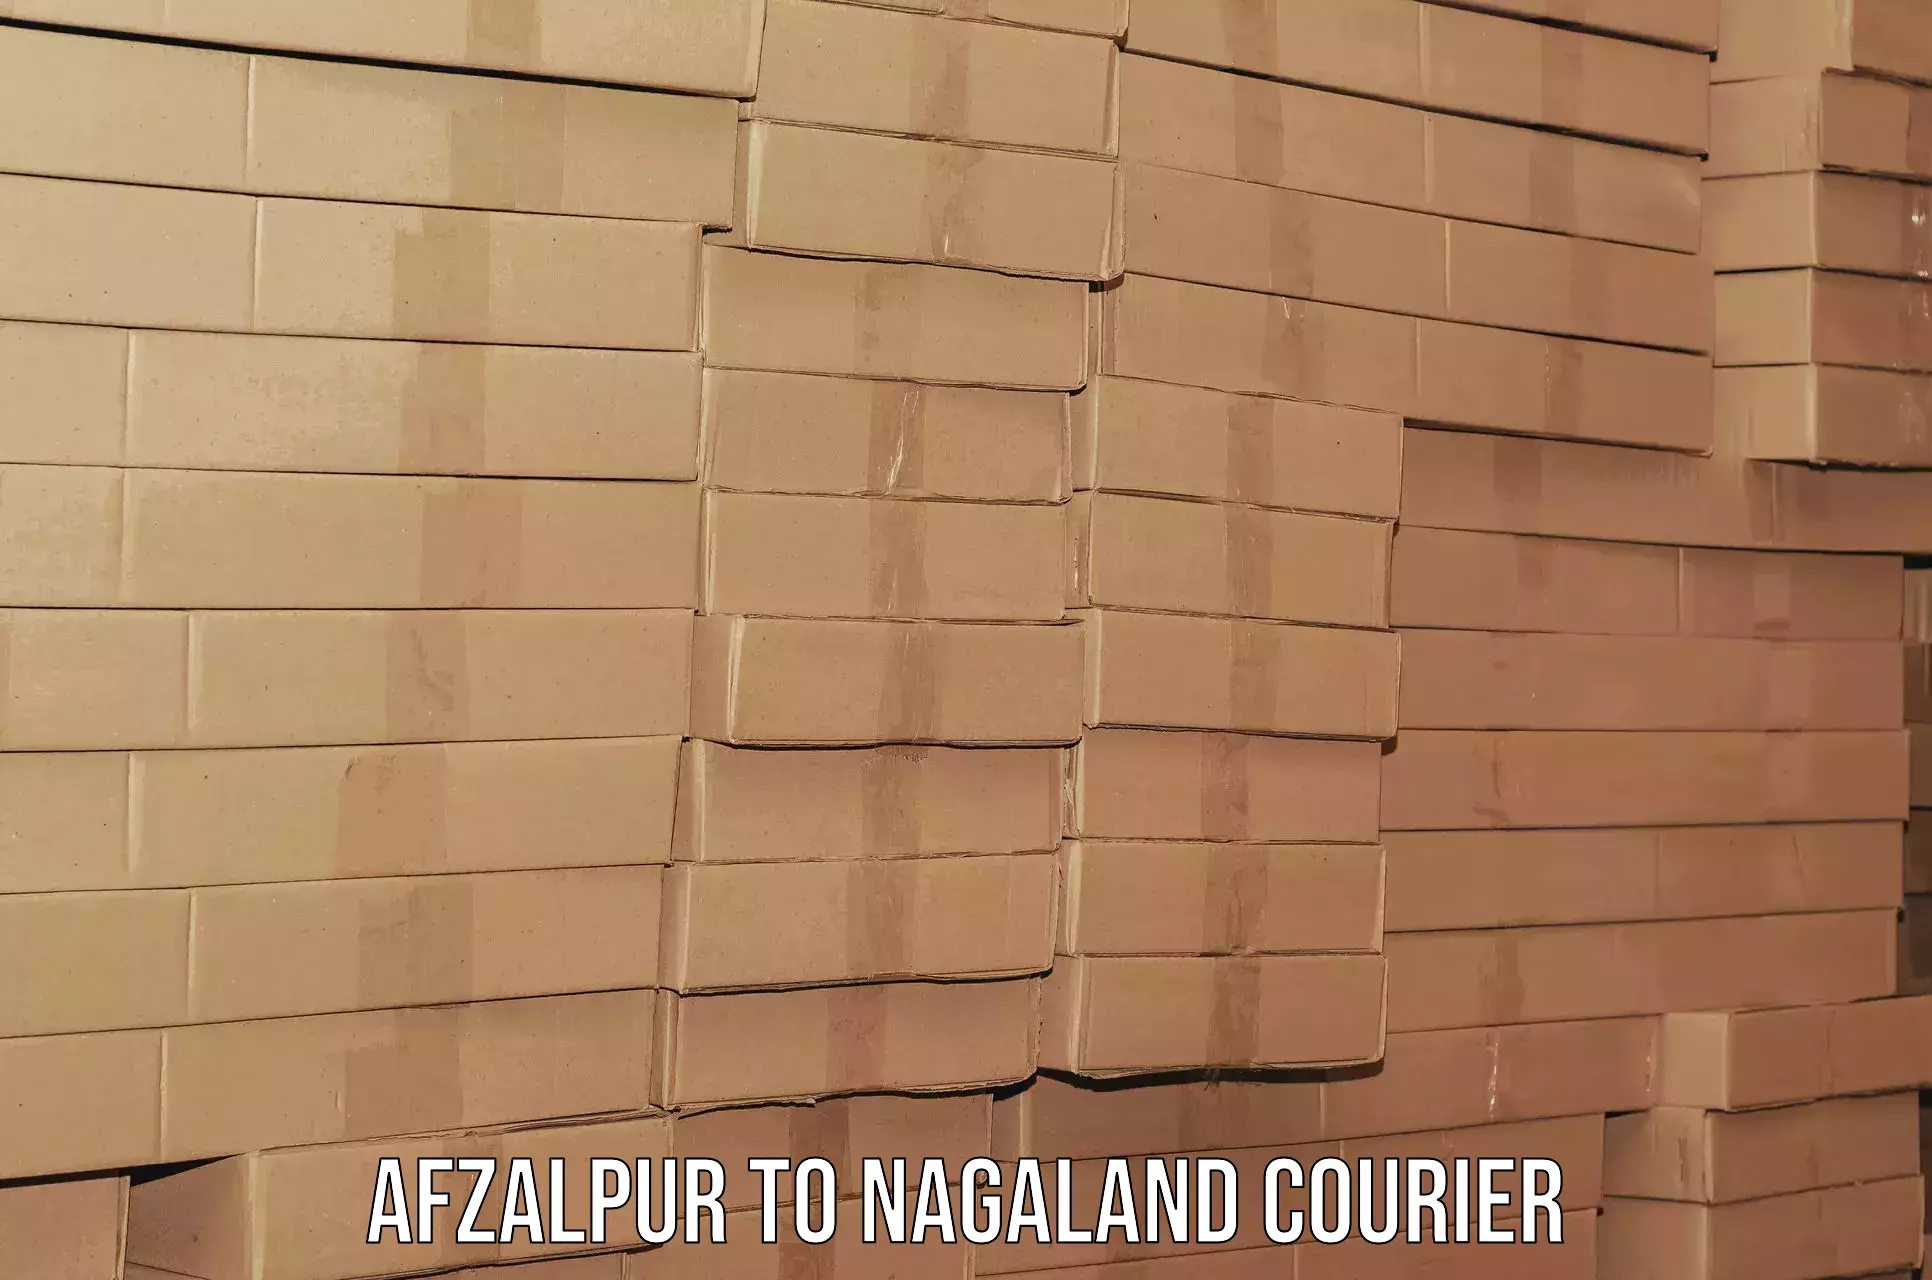 Furniture delivery service Afzalpur to Nagaland